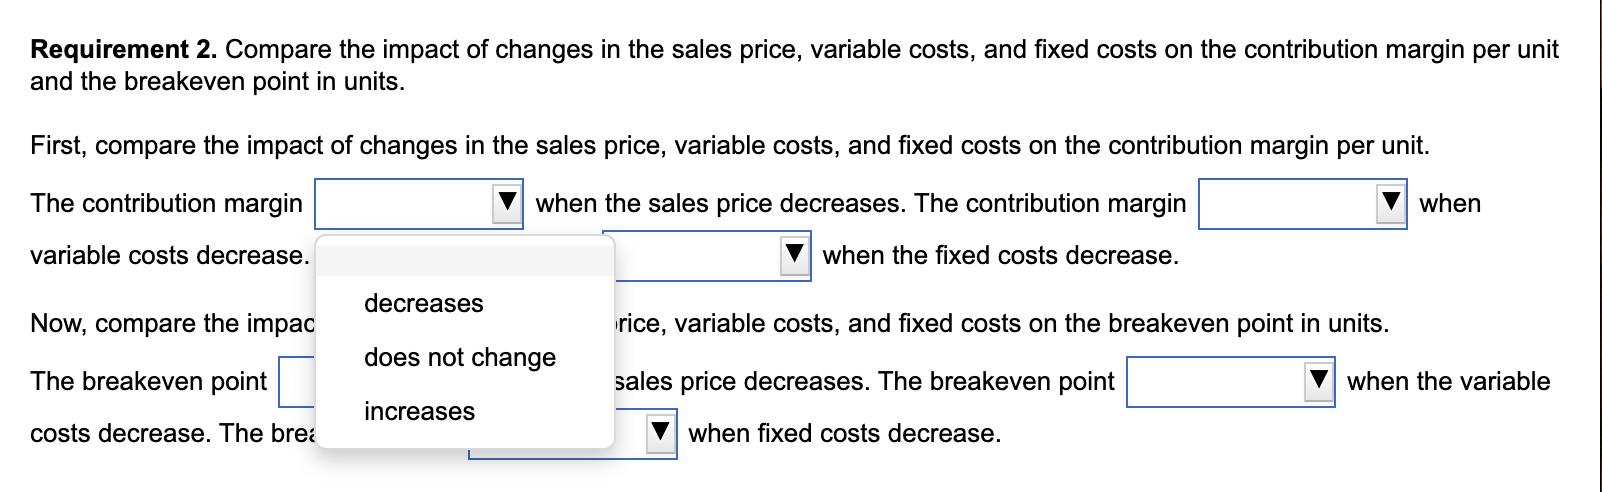 Requirement 2. Compare the impact of changes in the sales price, variable costs, and fixed costs on the contribution margin p